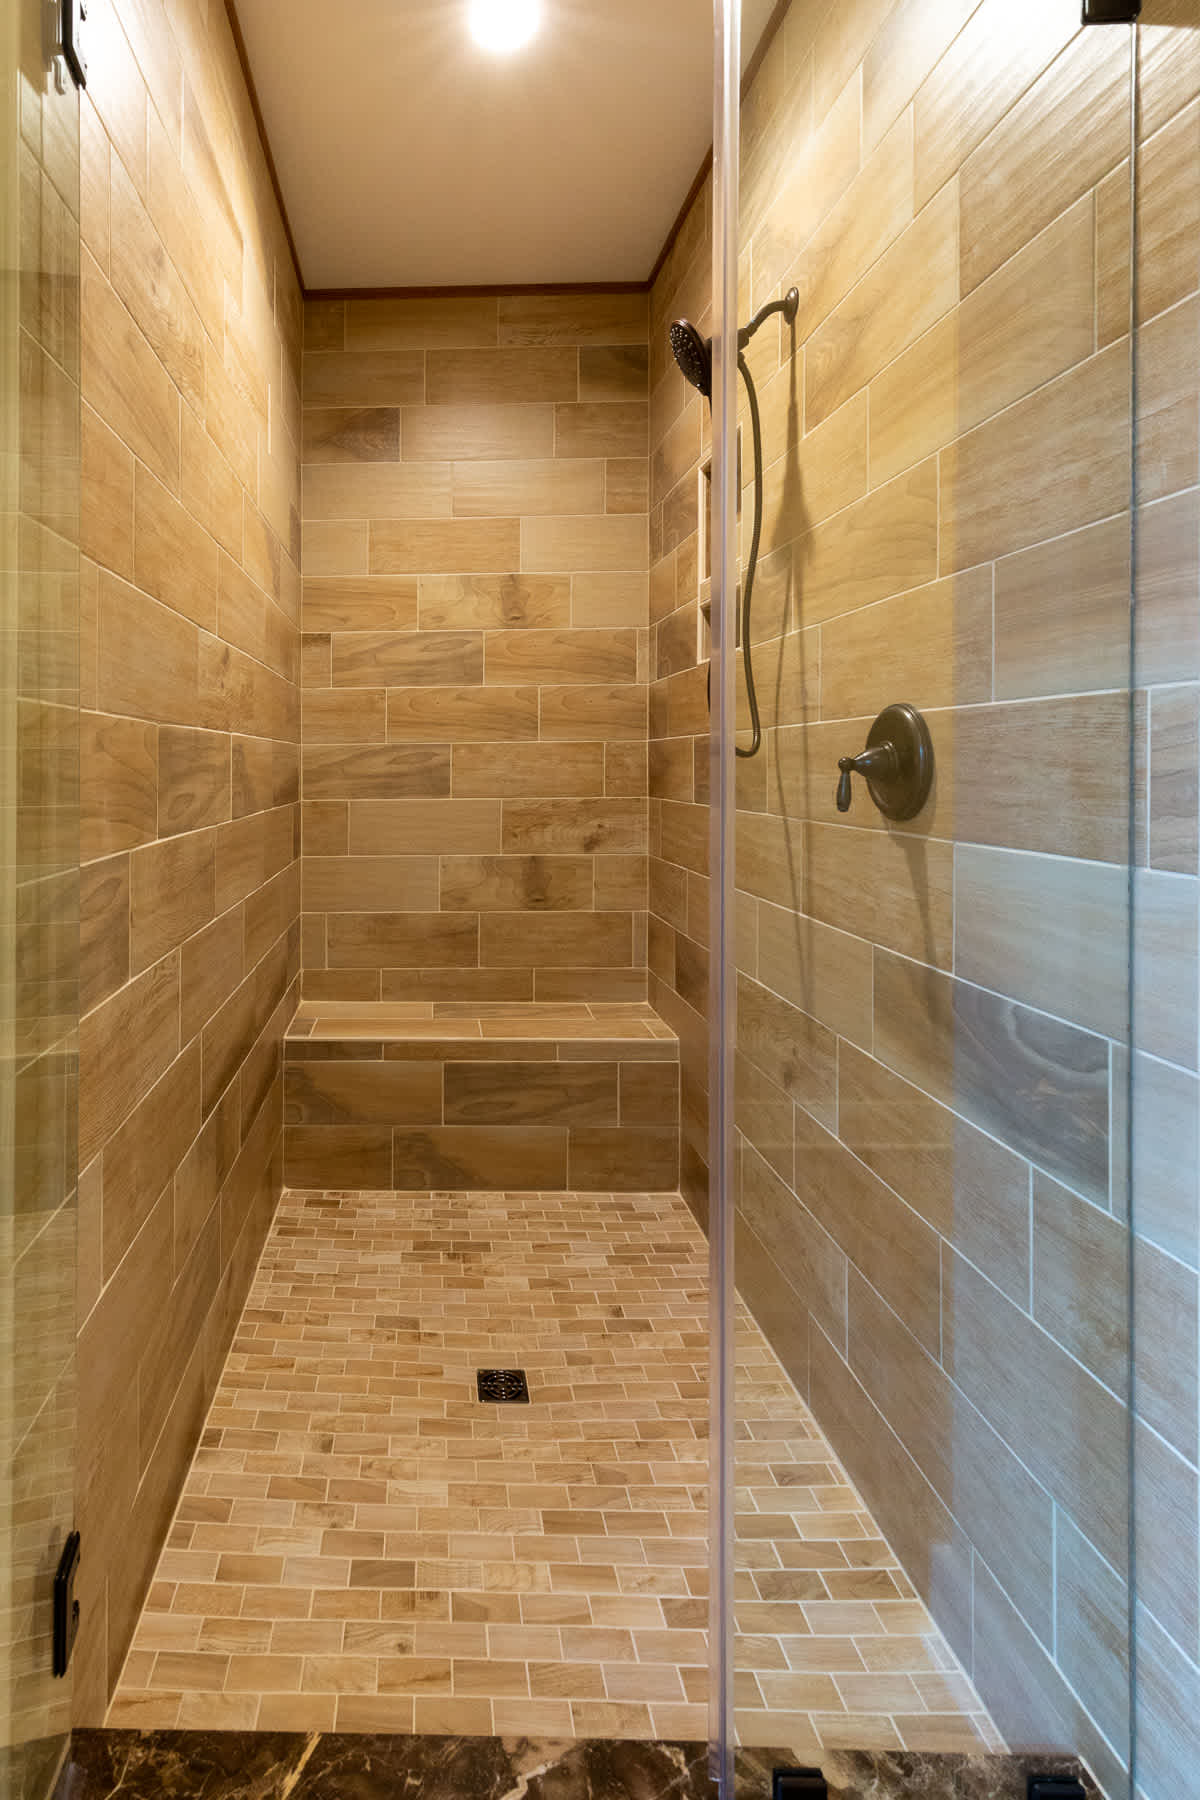 The master bathroom shower at the Geiger residences in Cullowhee, NC.